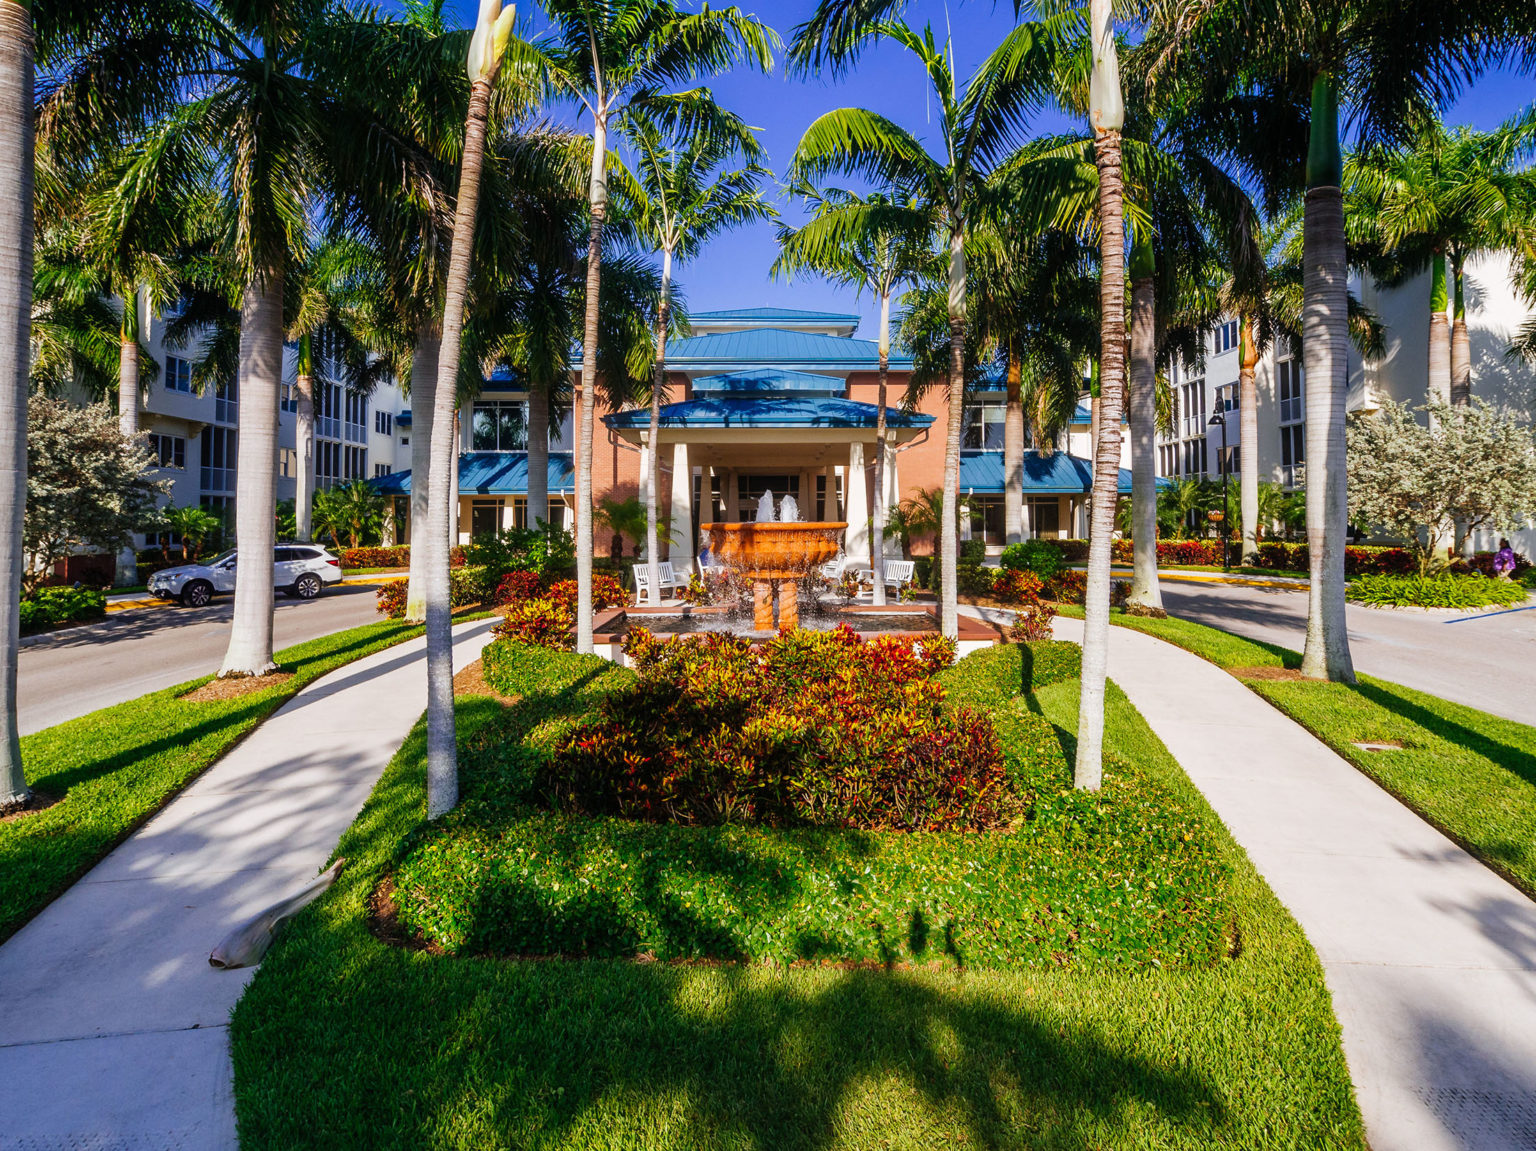 The Arbor luxury house of shell point Myers, FL